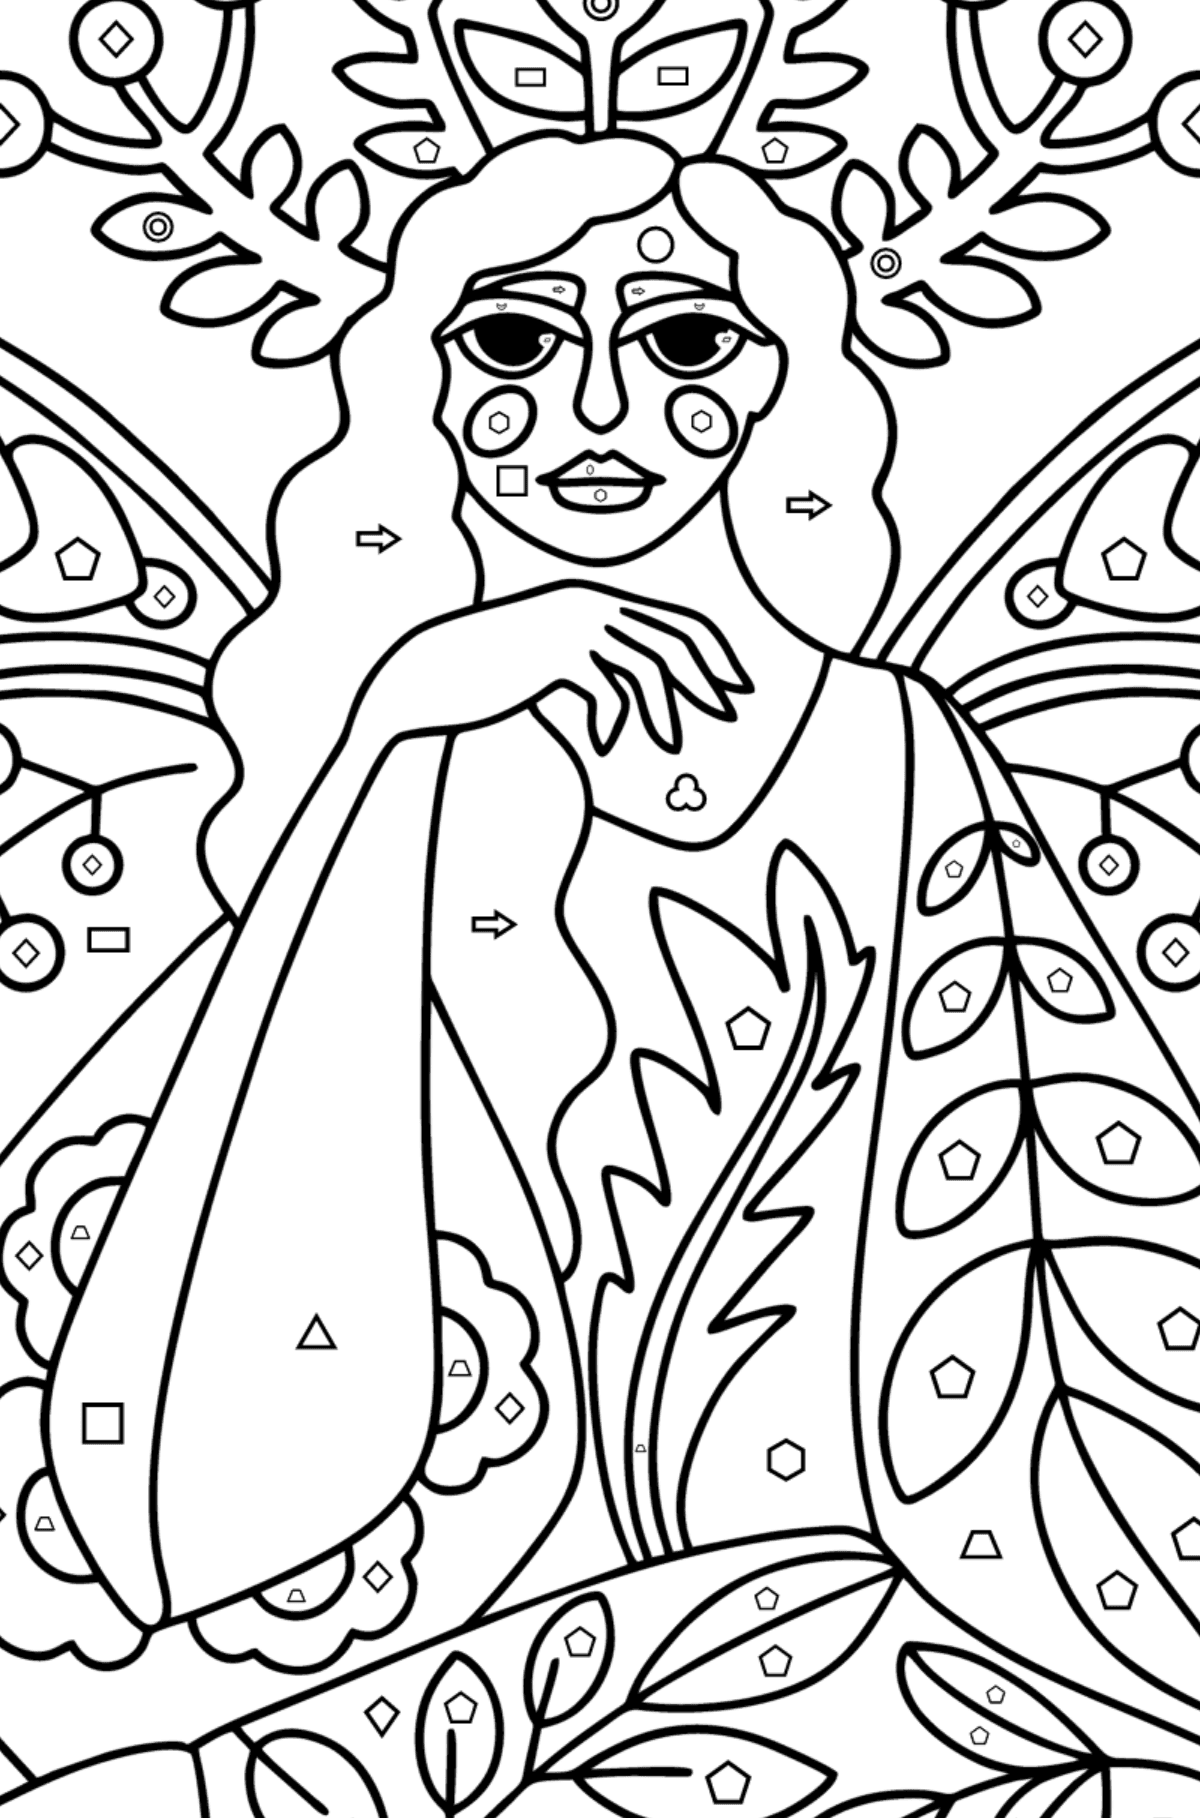 Fairy Tattoo (difficult) coloring page - Coloring by Geometric Shapes for Kids